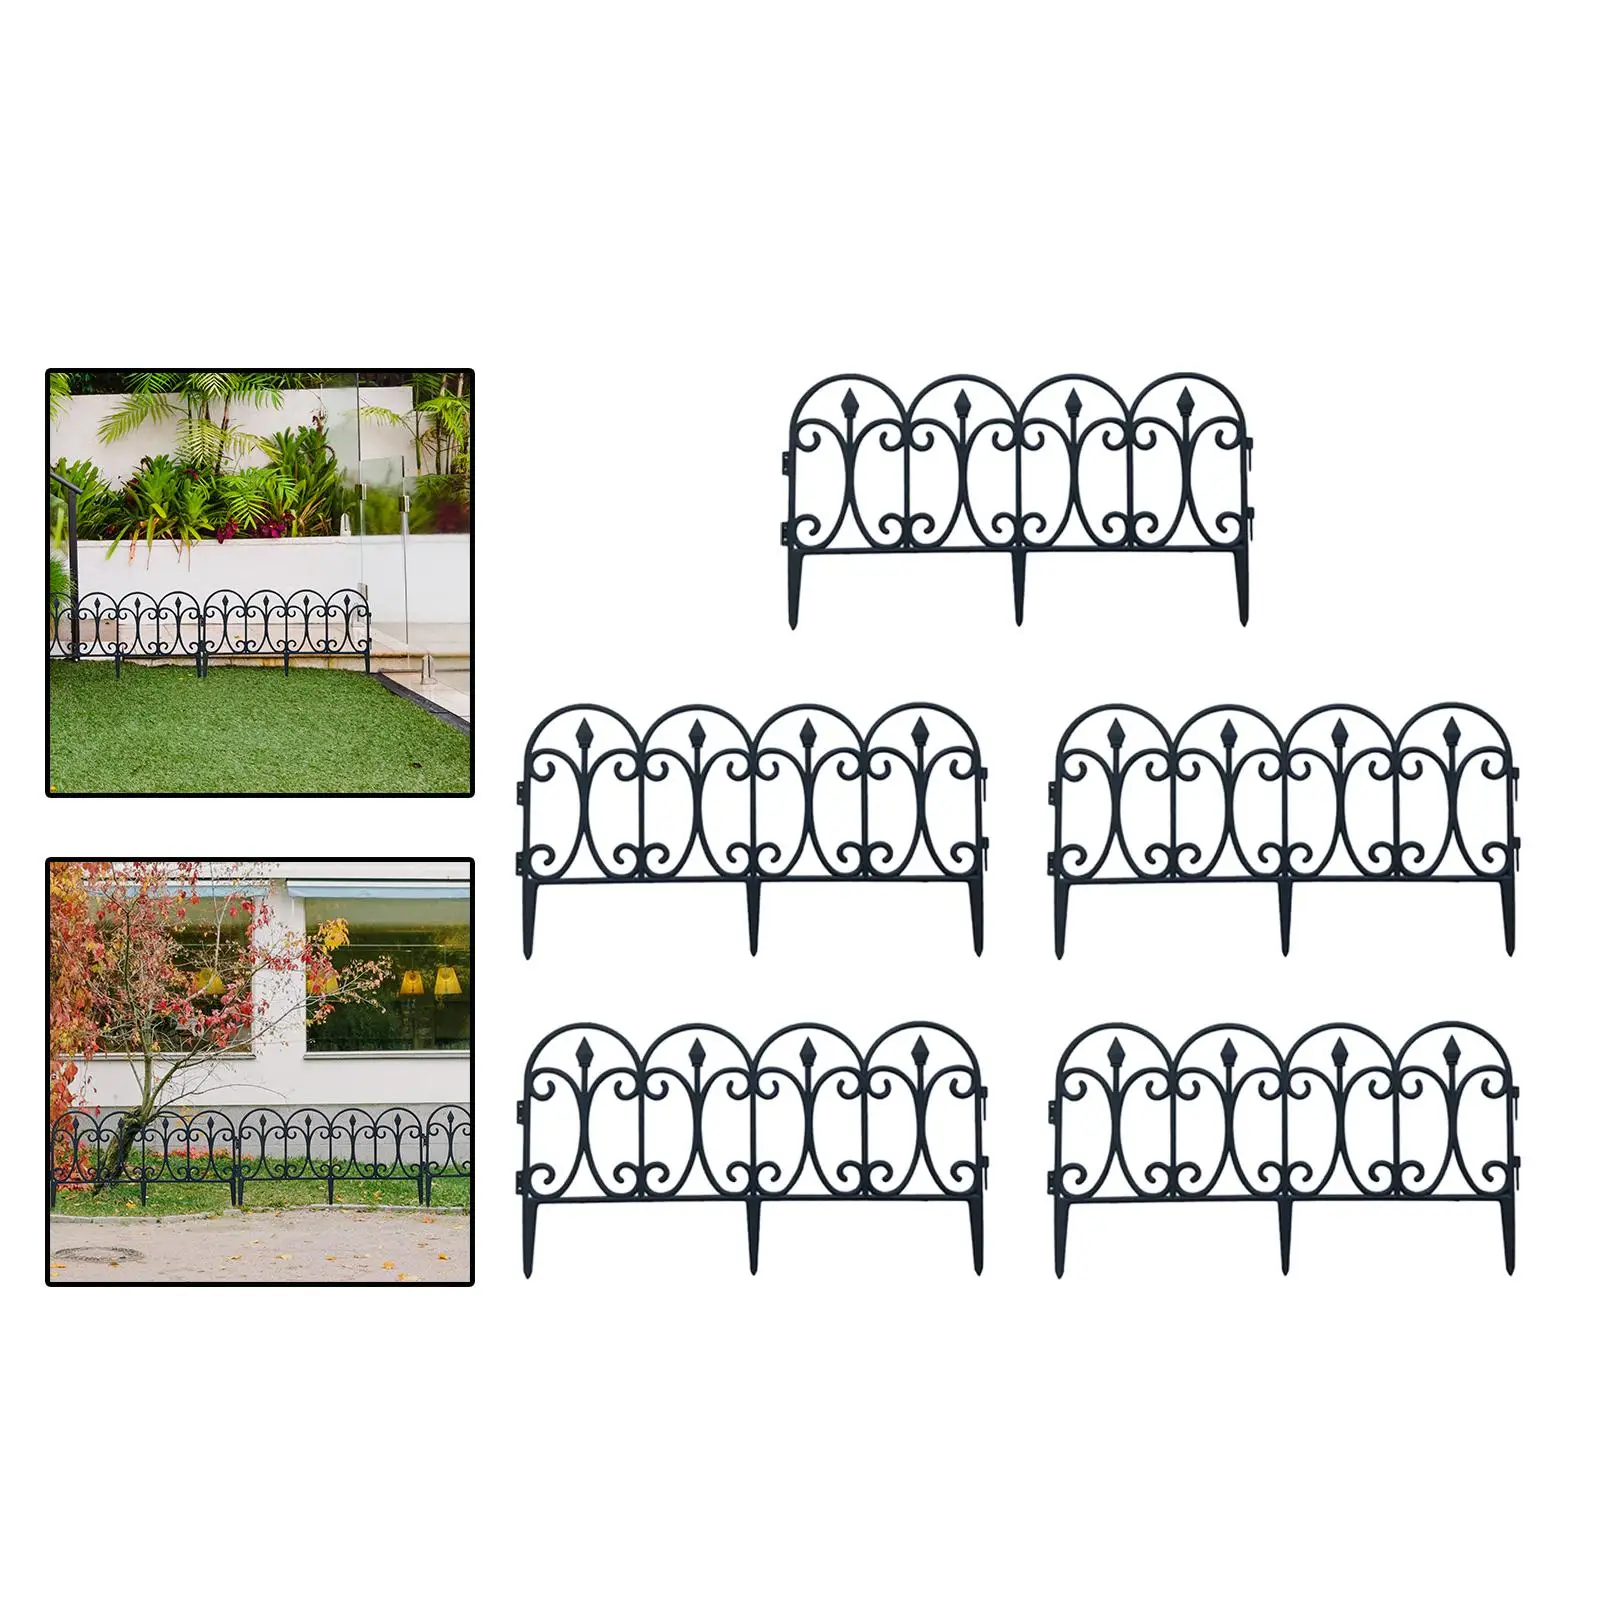 5x Artificial Garden Fence Ground Insert Border Decoration Fencing for Landscaping Lawn Flower Bed Edging Yard DIY Decorative